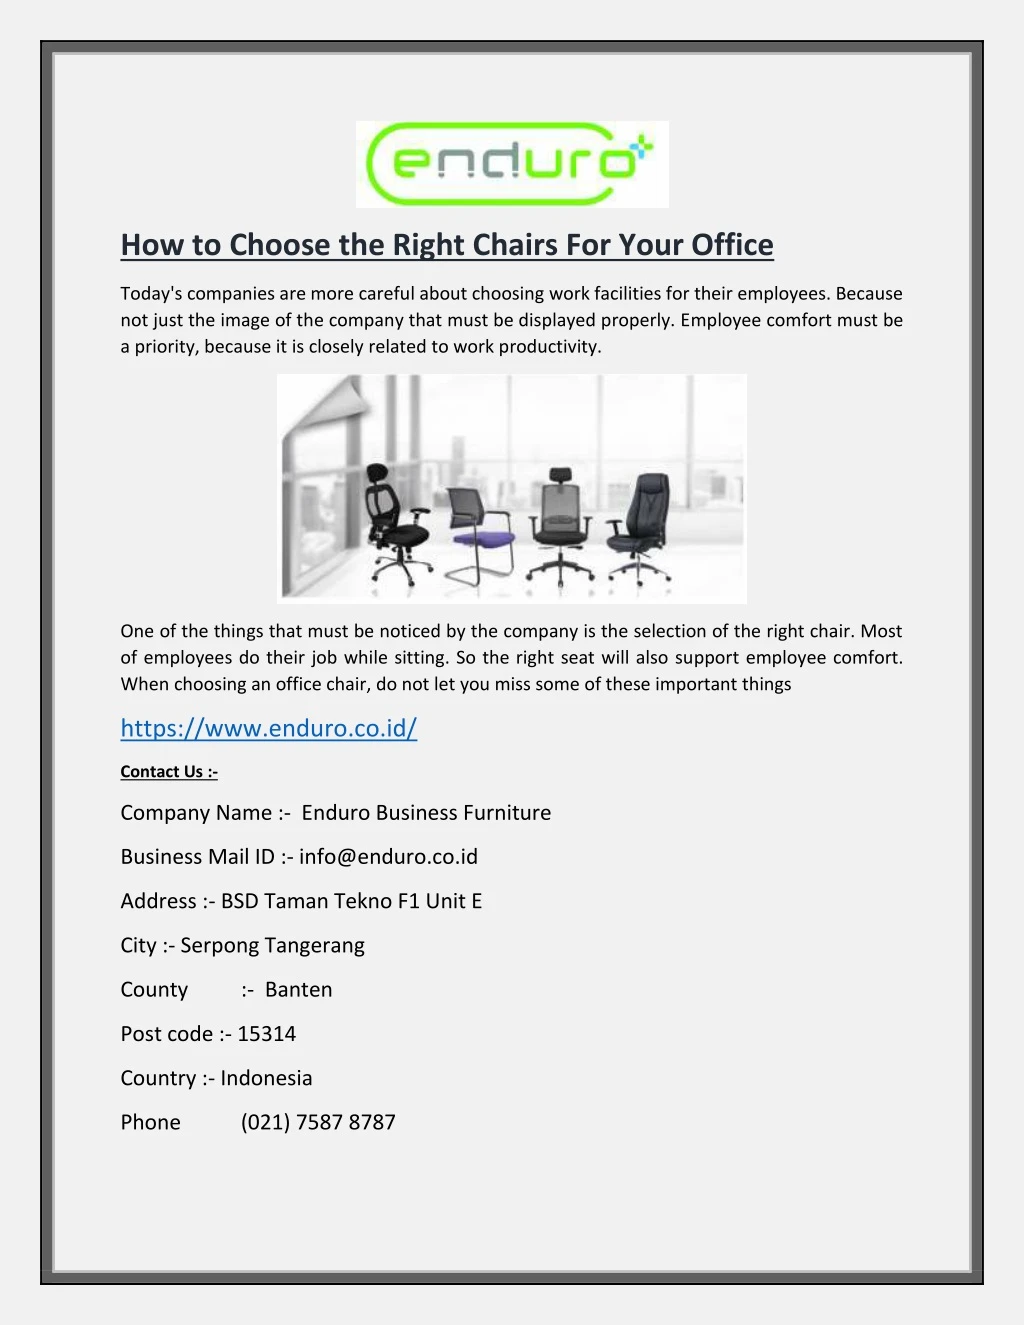 how to choose the right chairs for your office